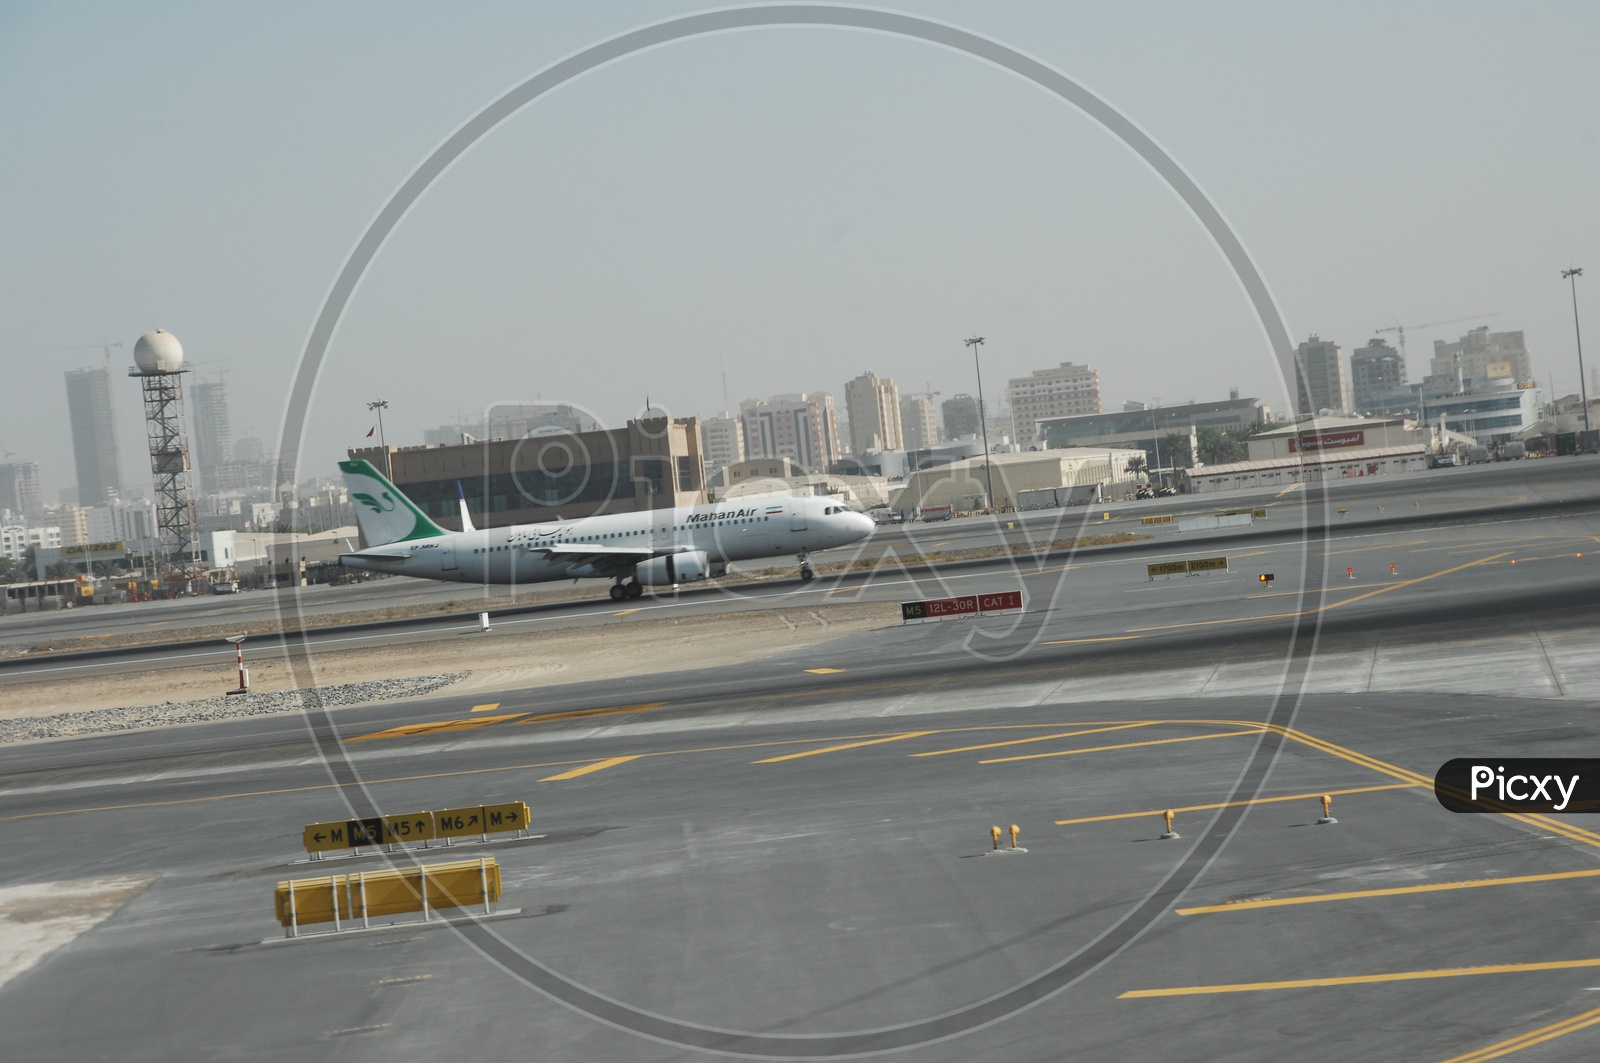 Mahan Air flight on Runway about to take off